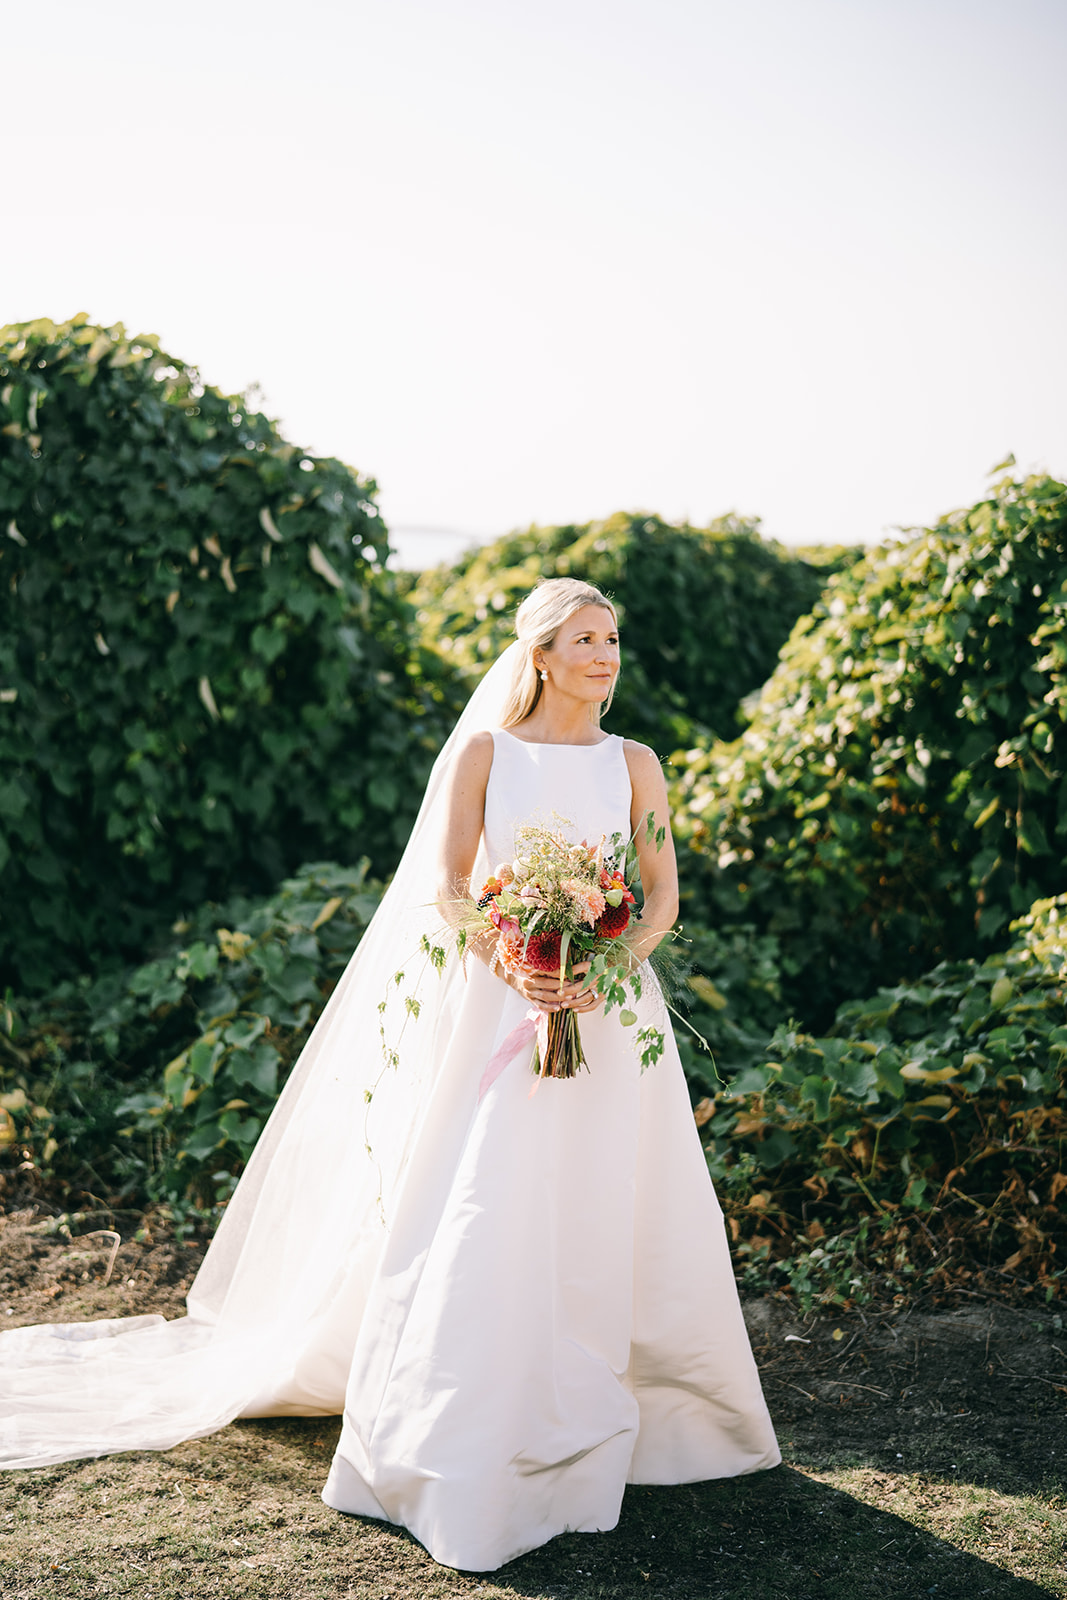 Woman in white wedding dress holding a bouquet looking off into the distance in front of greenery